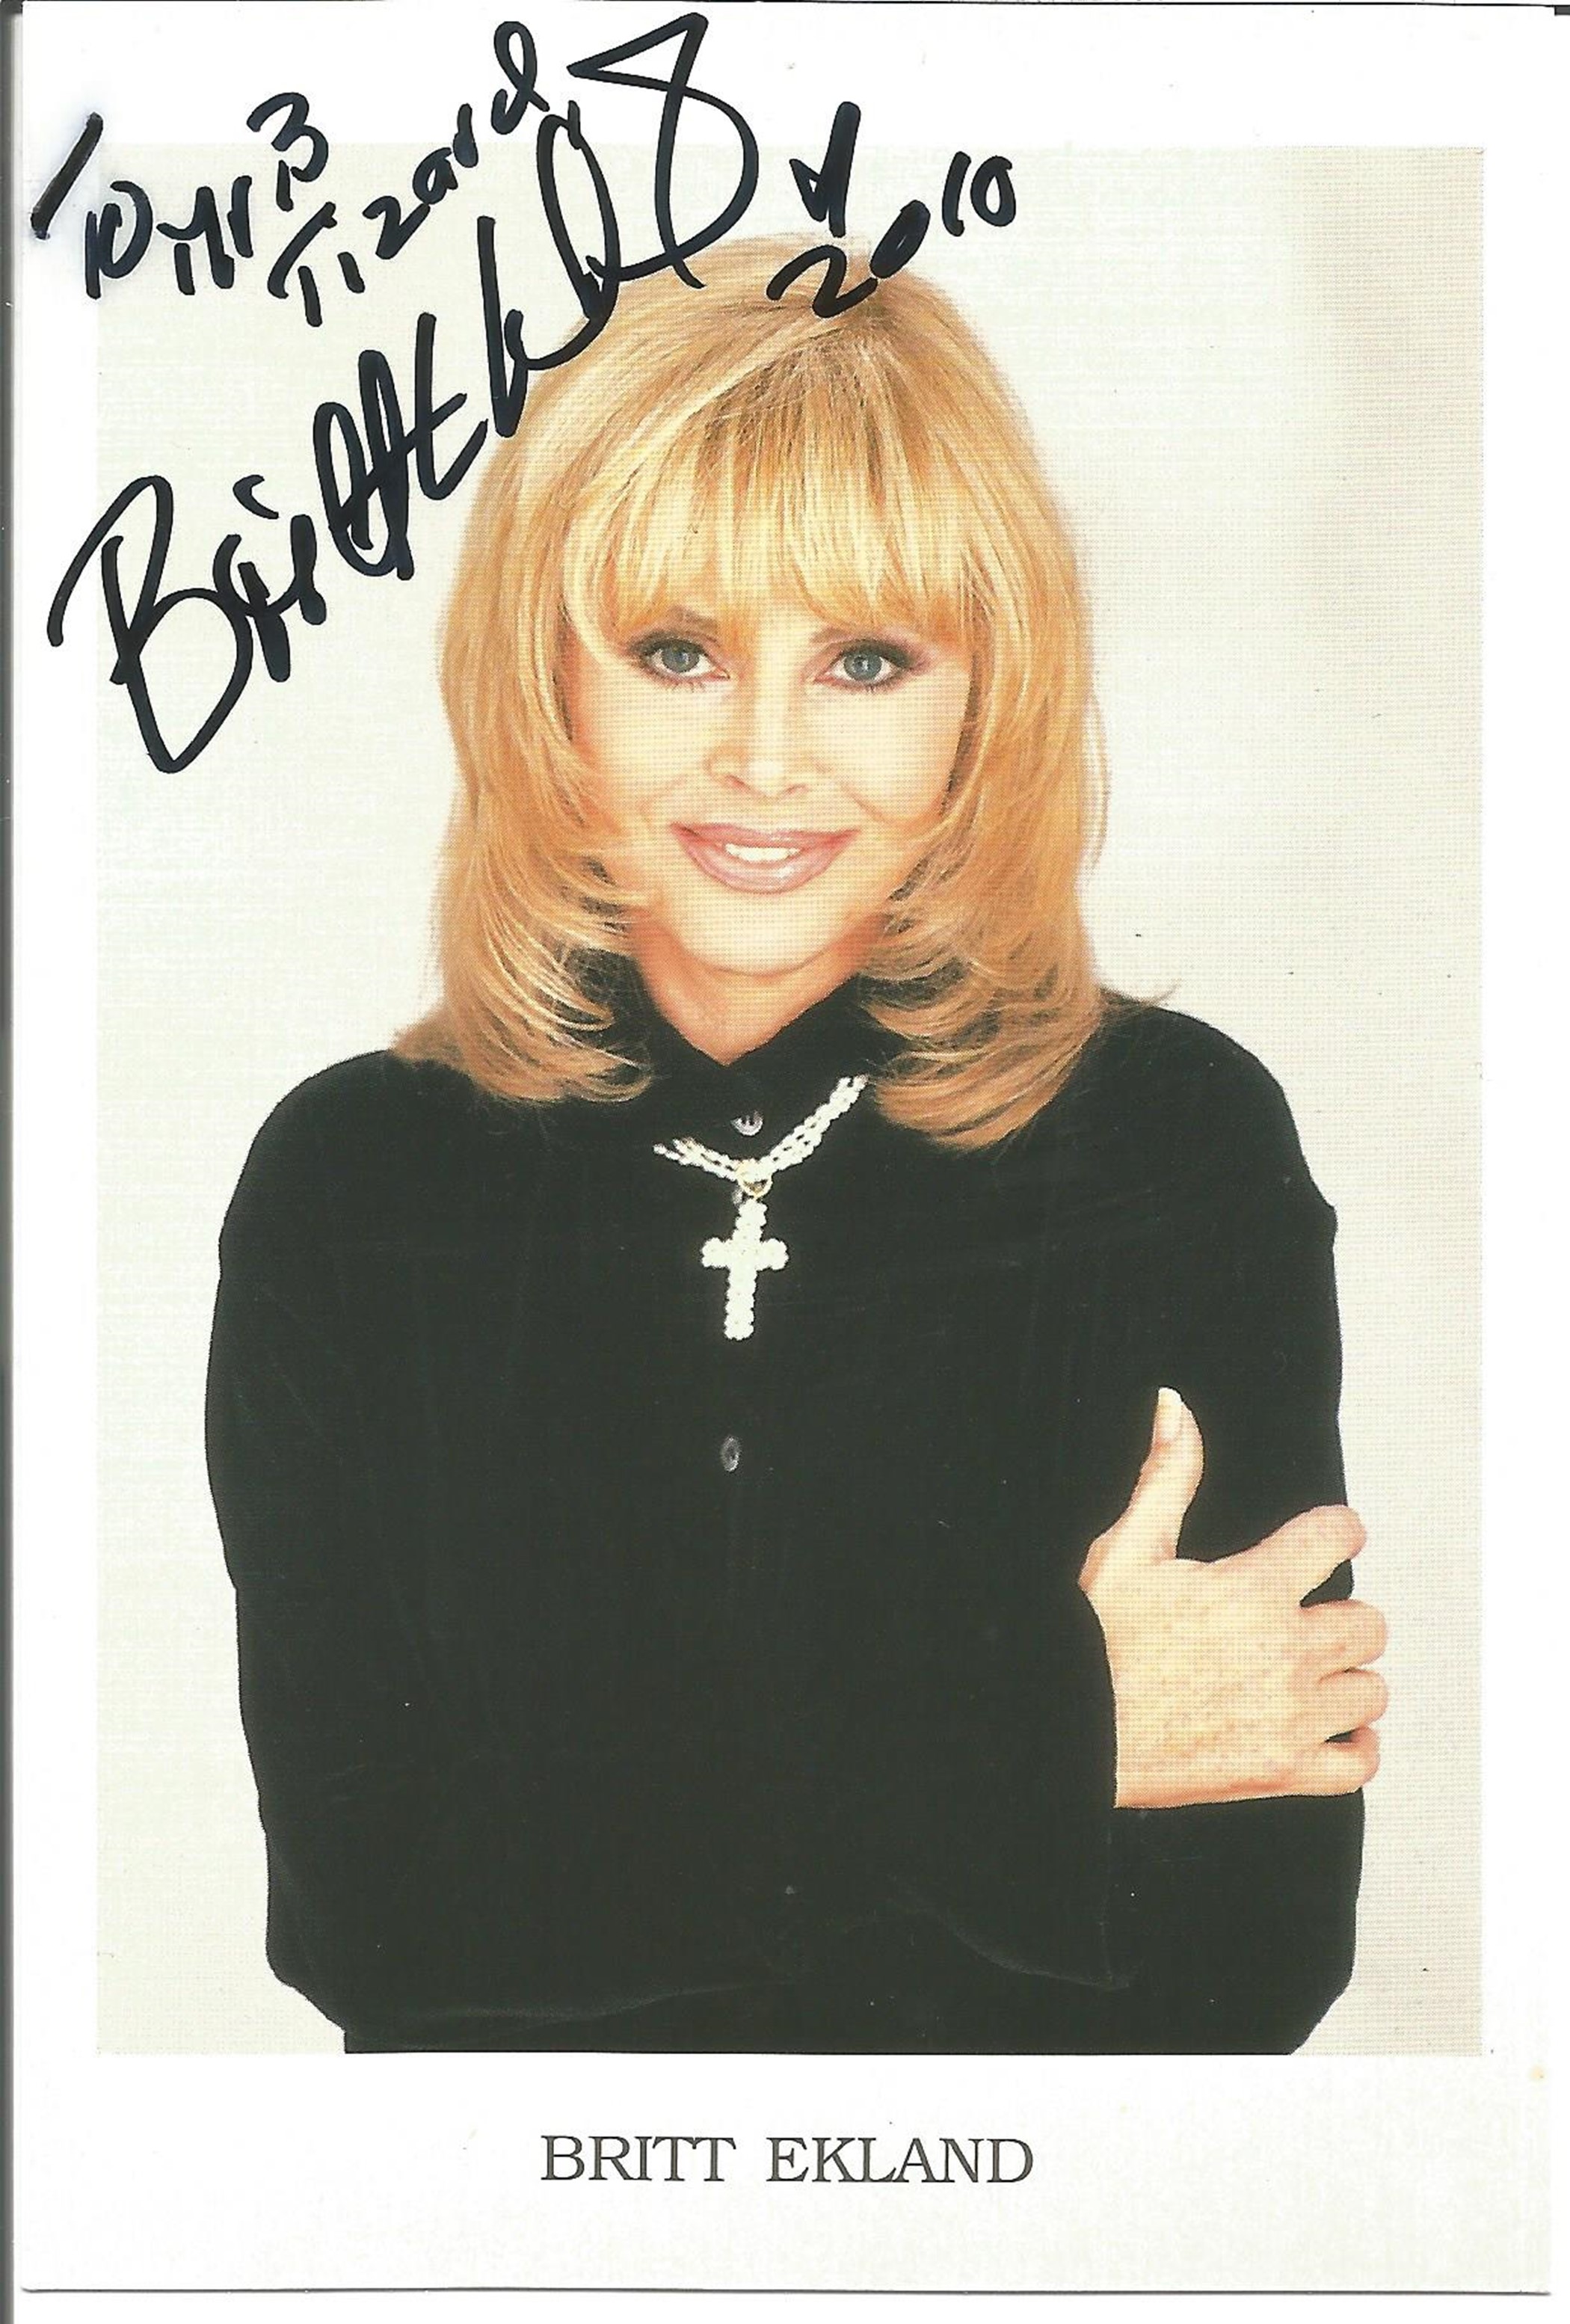 Signed 6x4 colour photo of James Bond girl Britt Ekland who starred as Mary Goodnight in the James